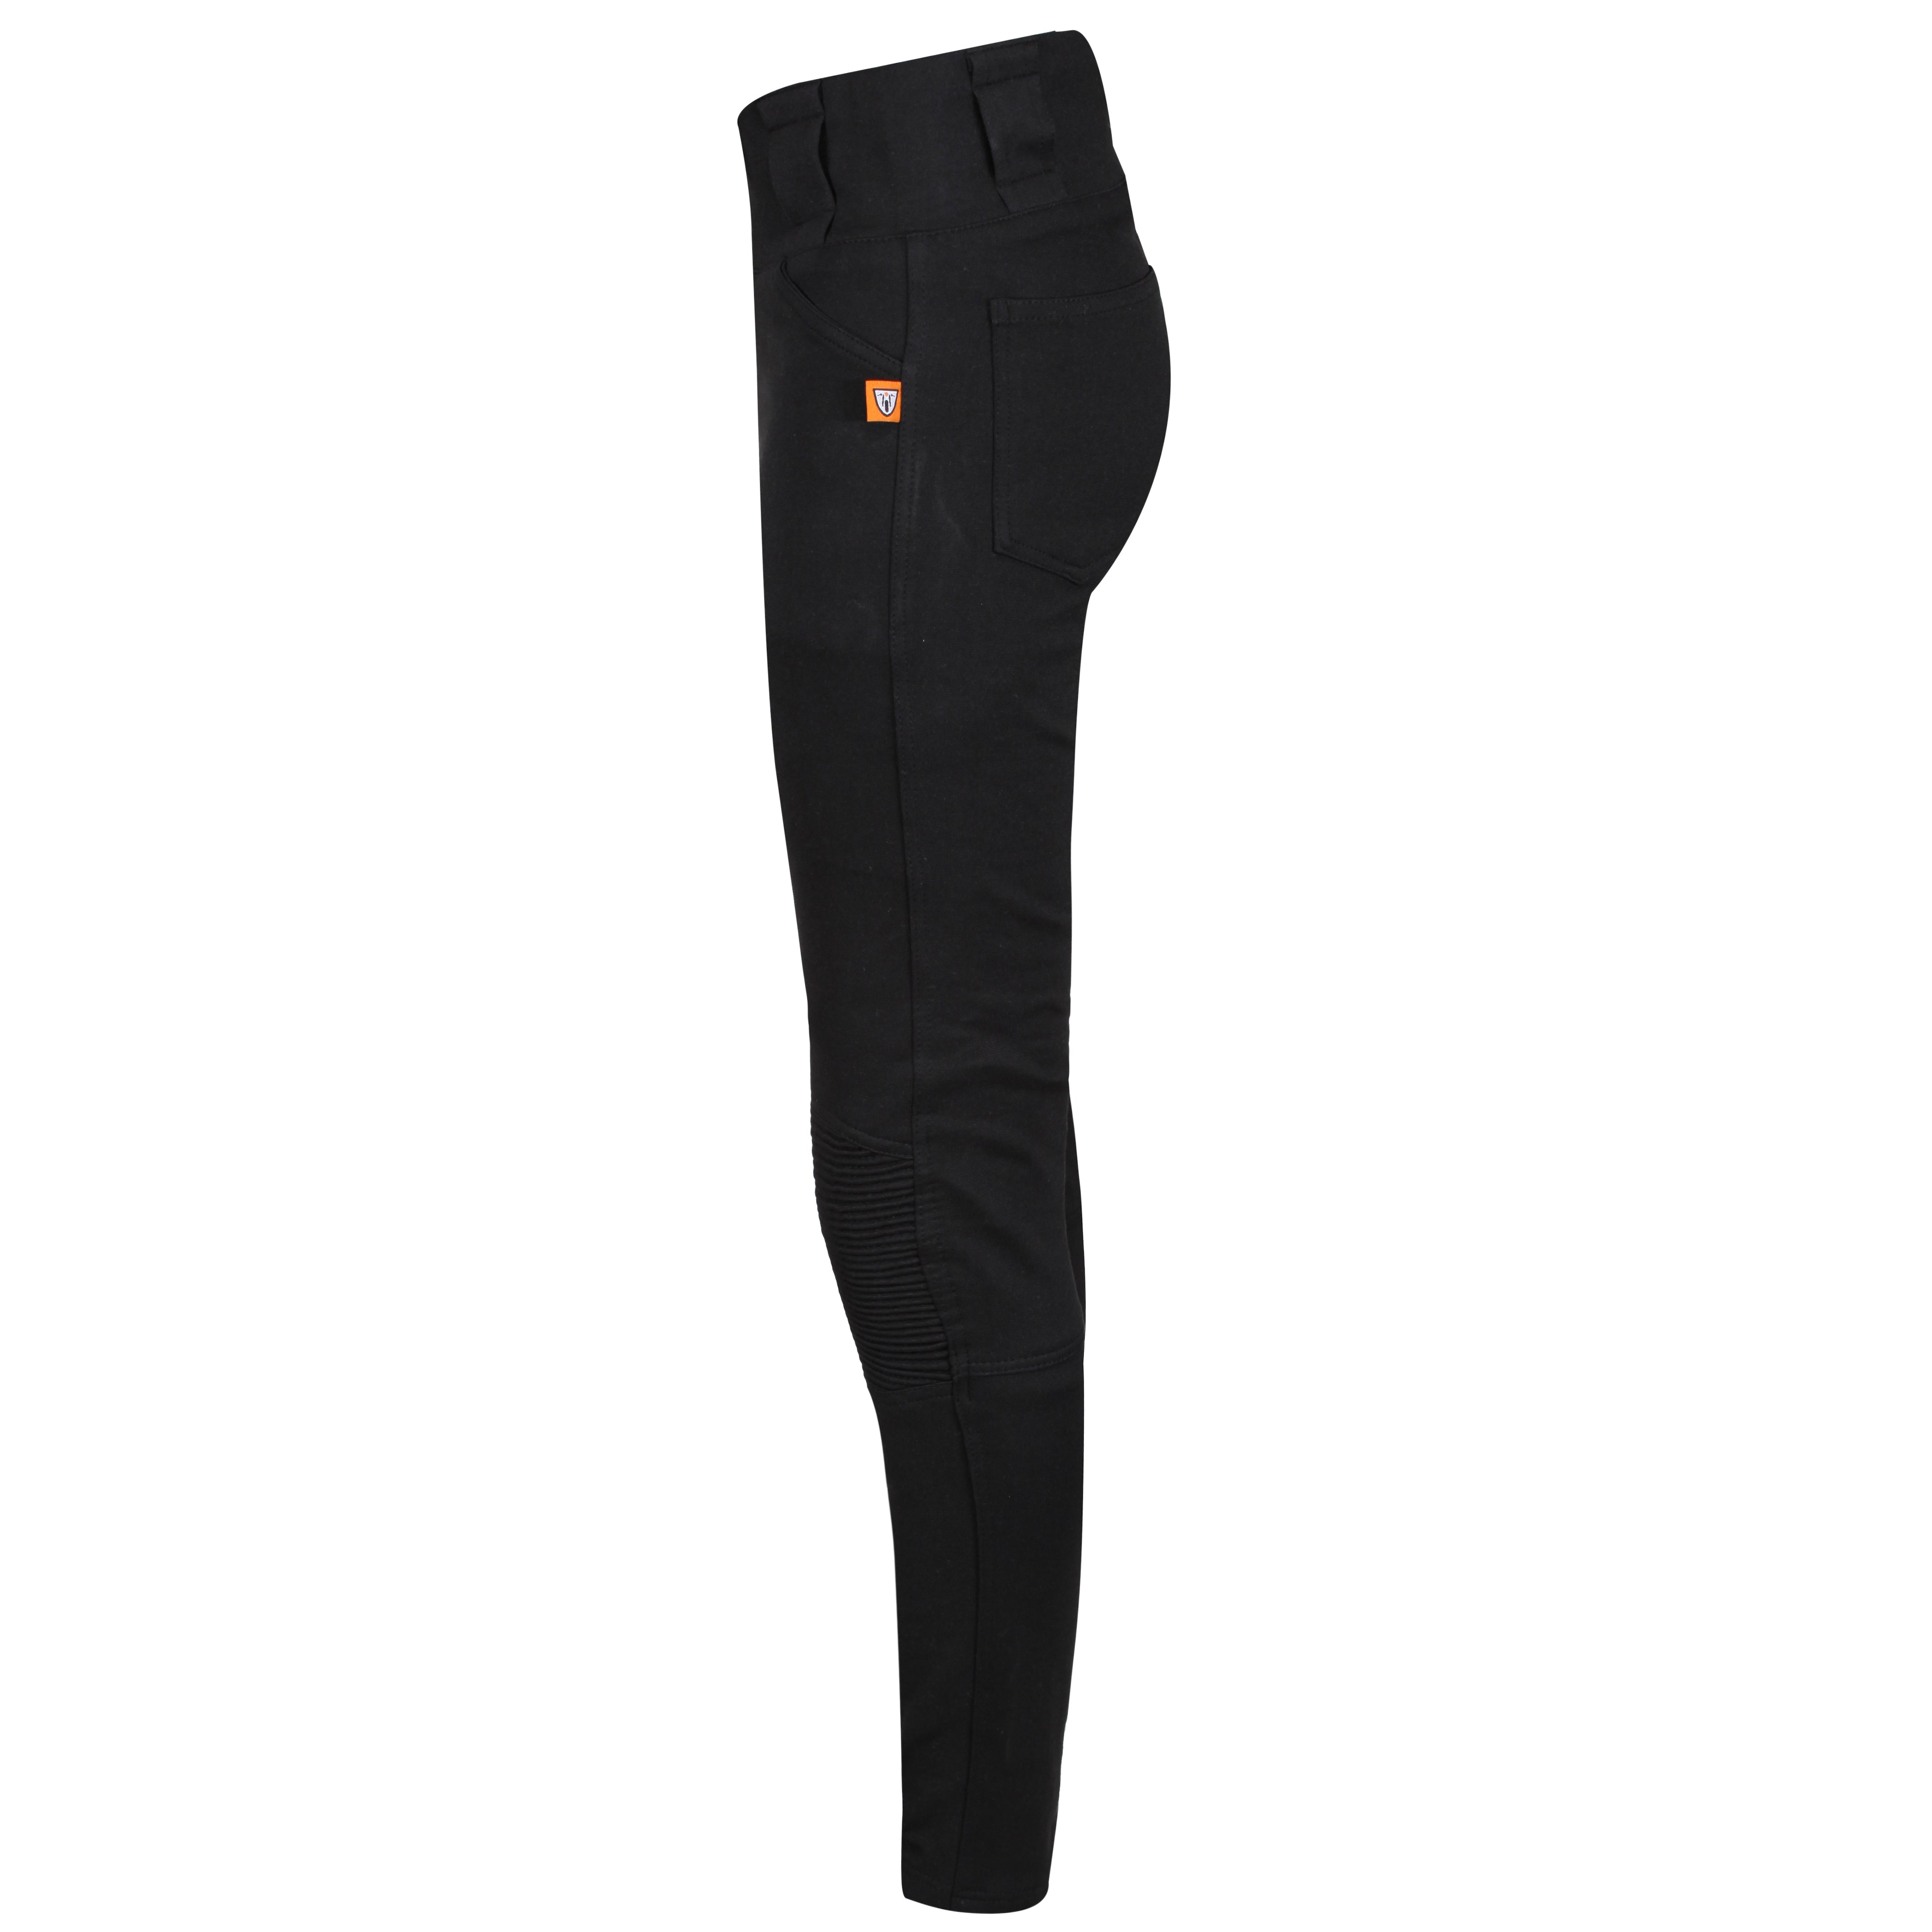 Bblack women&#39;s motorcycle ribbed knee design leggings  from MotoGirl from a side